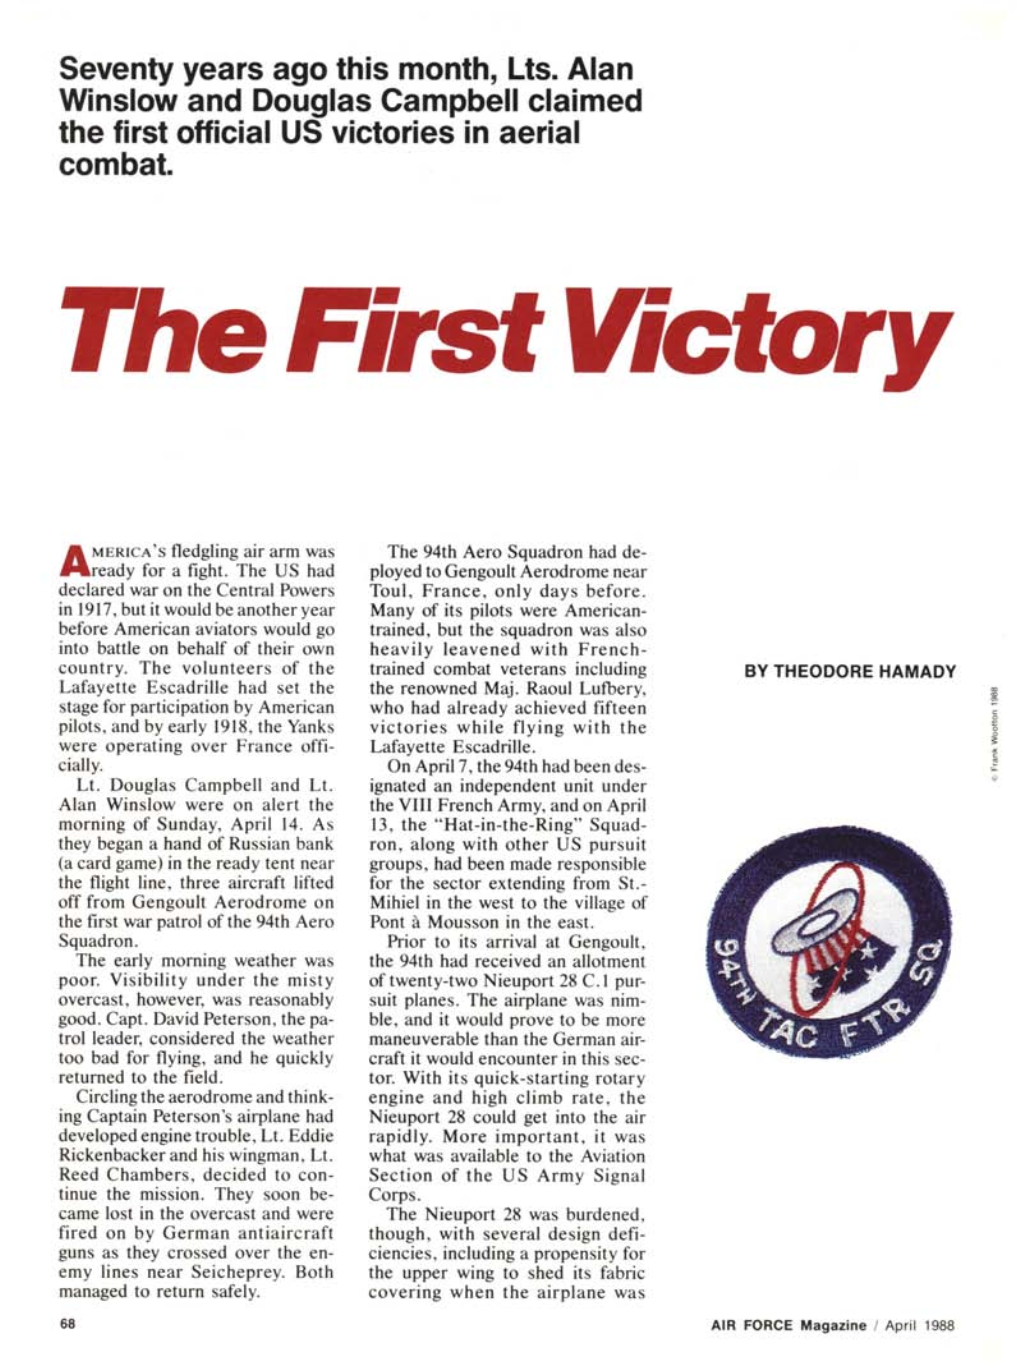 The First Victory